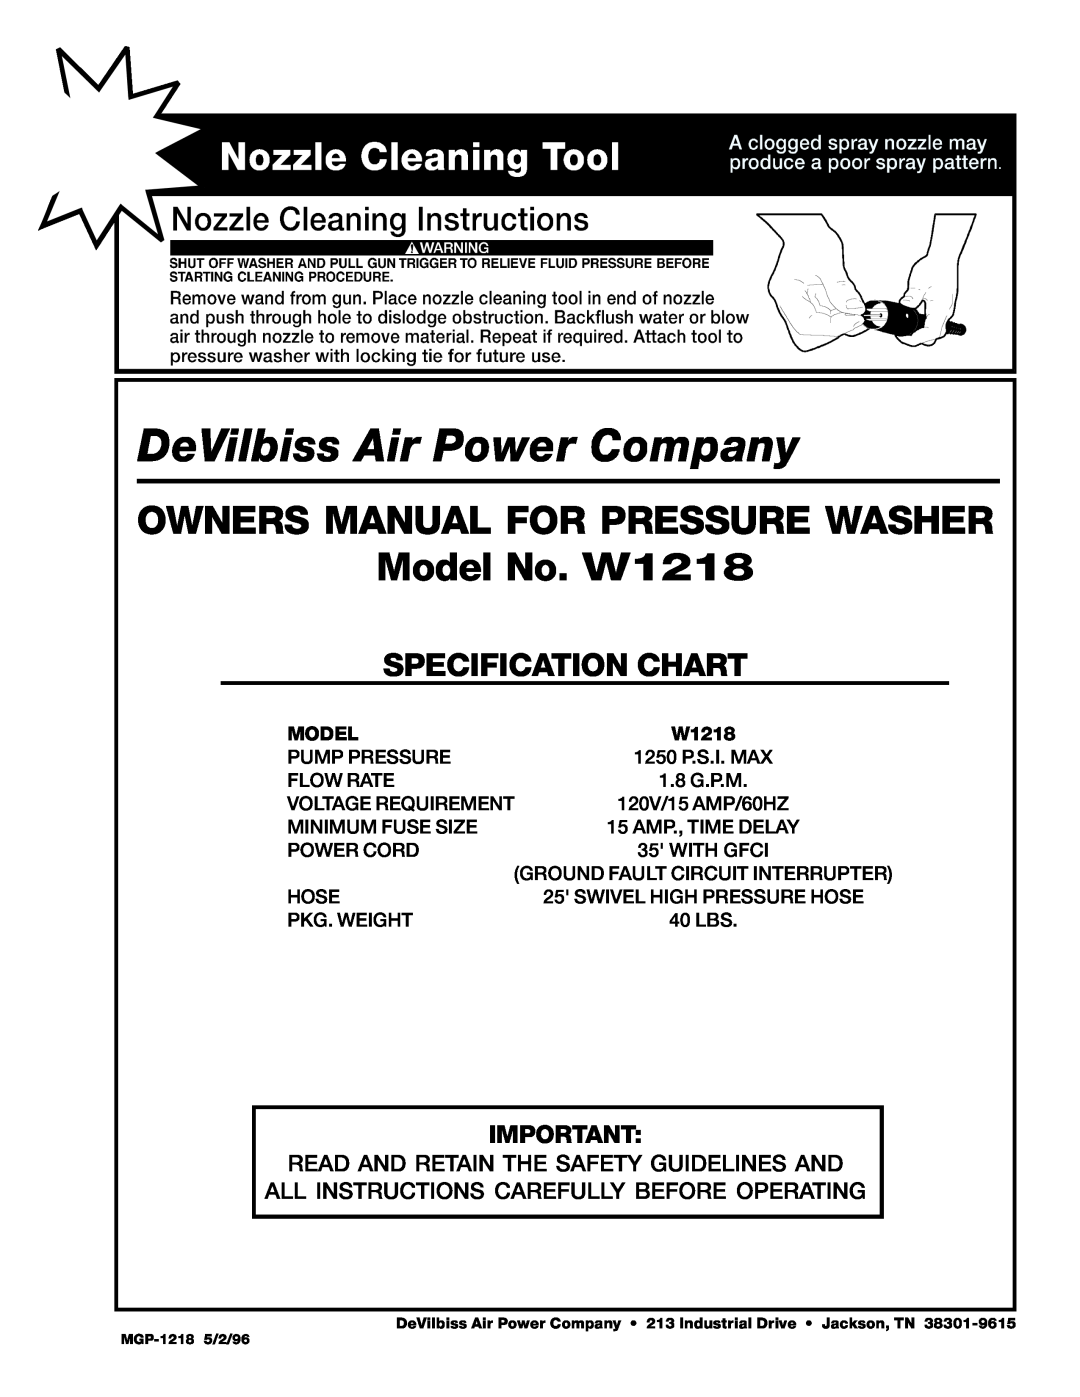 DeVillbiss Air Power Company MGP-1218 owner manual Model No. W1218, Specification Chart 